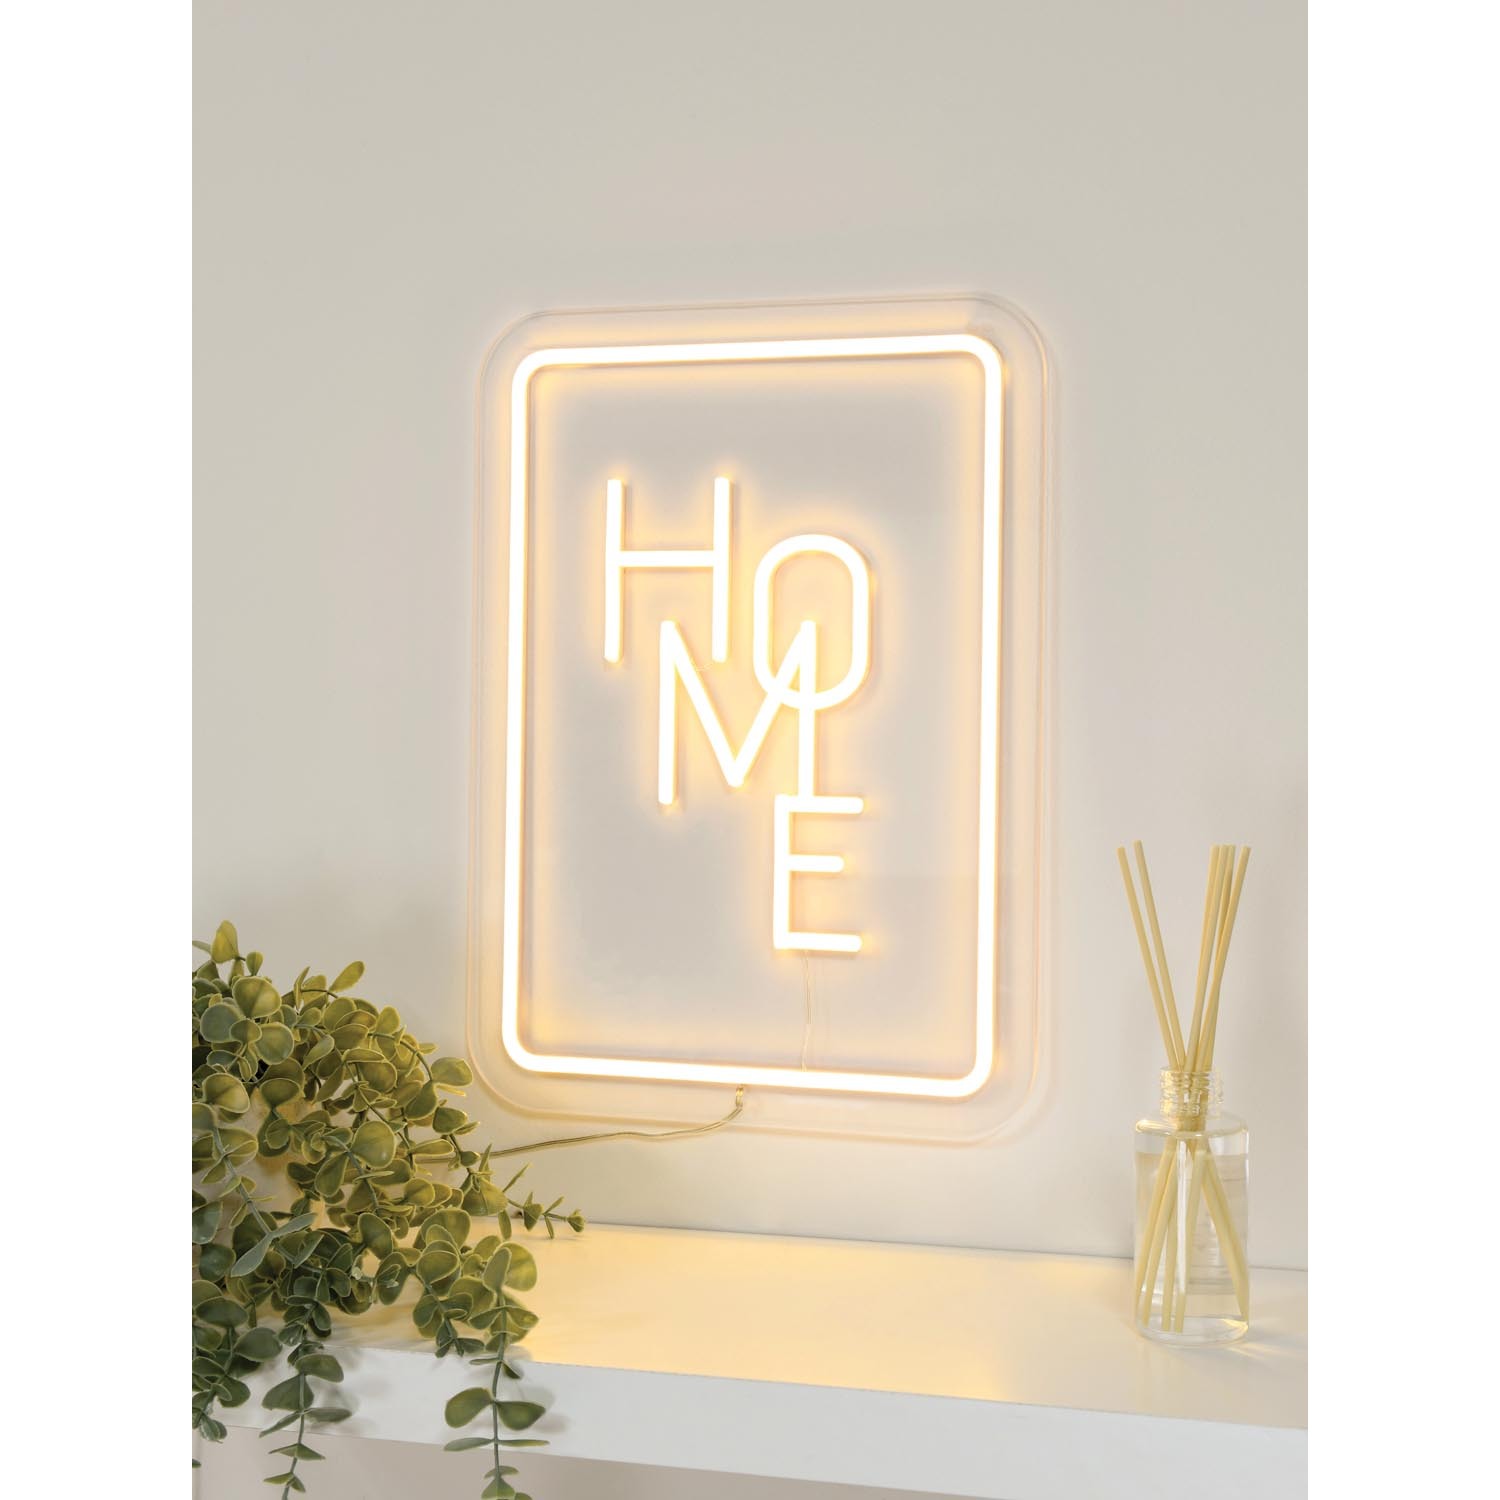 Home LED Neon Sign - Warm White Image 1